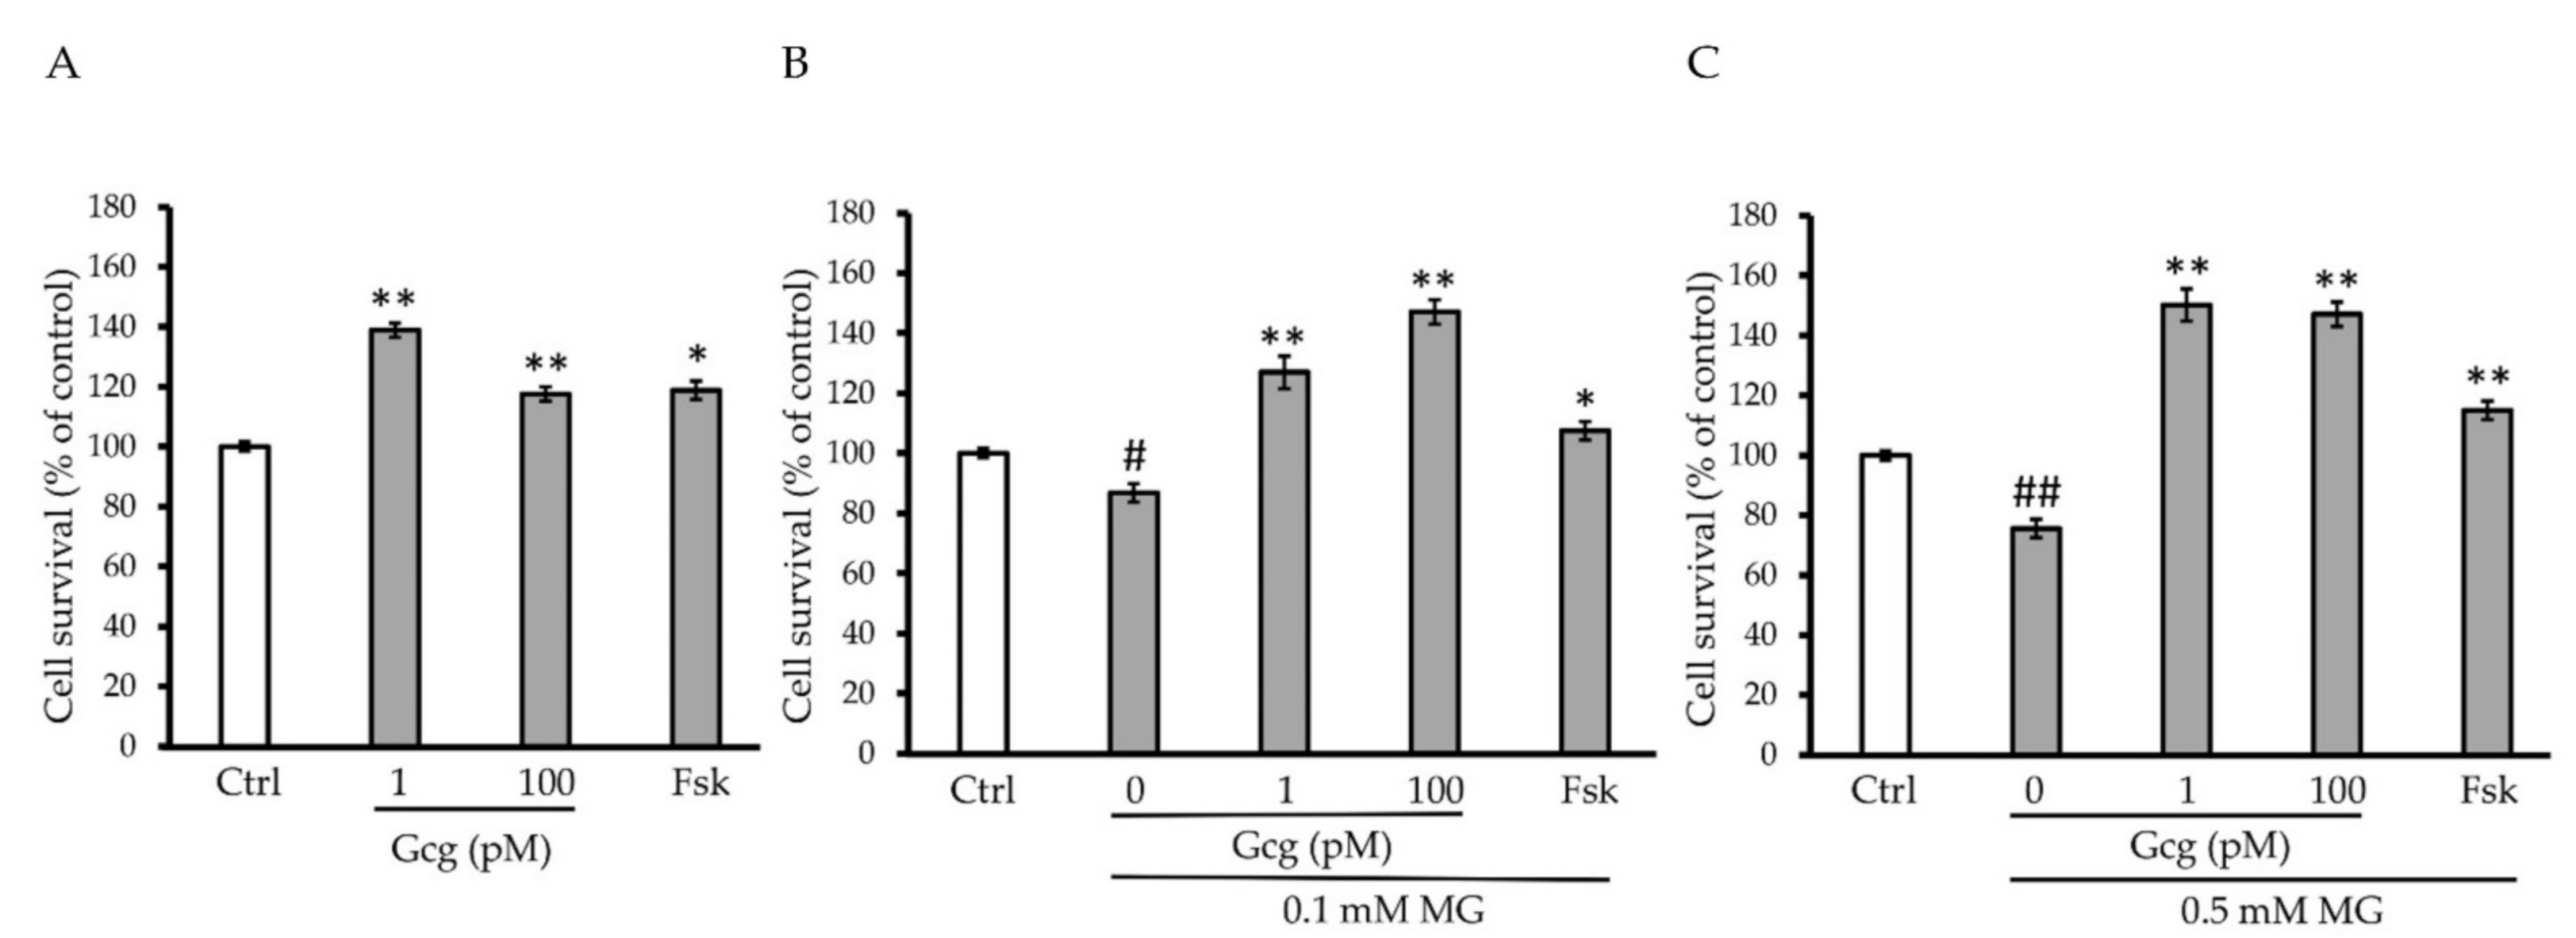 Biomolecules Free Full Text Glucagon Prevents Cytotoxicity Induced By Methylglyoxal In A Rat Neuronal Cell Line Model Html